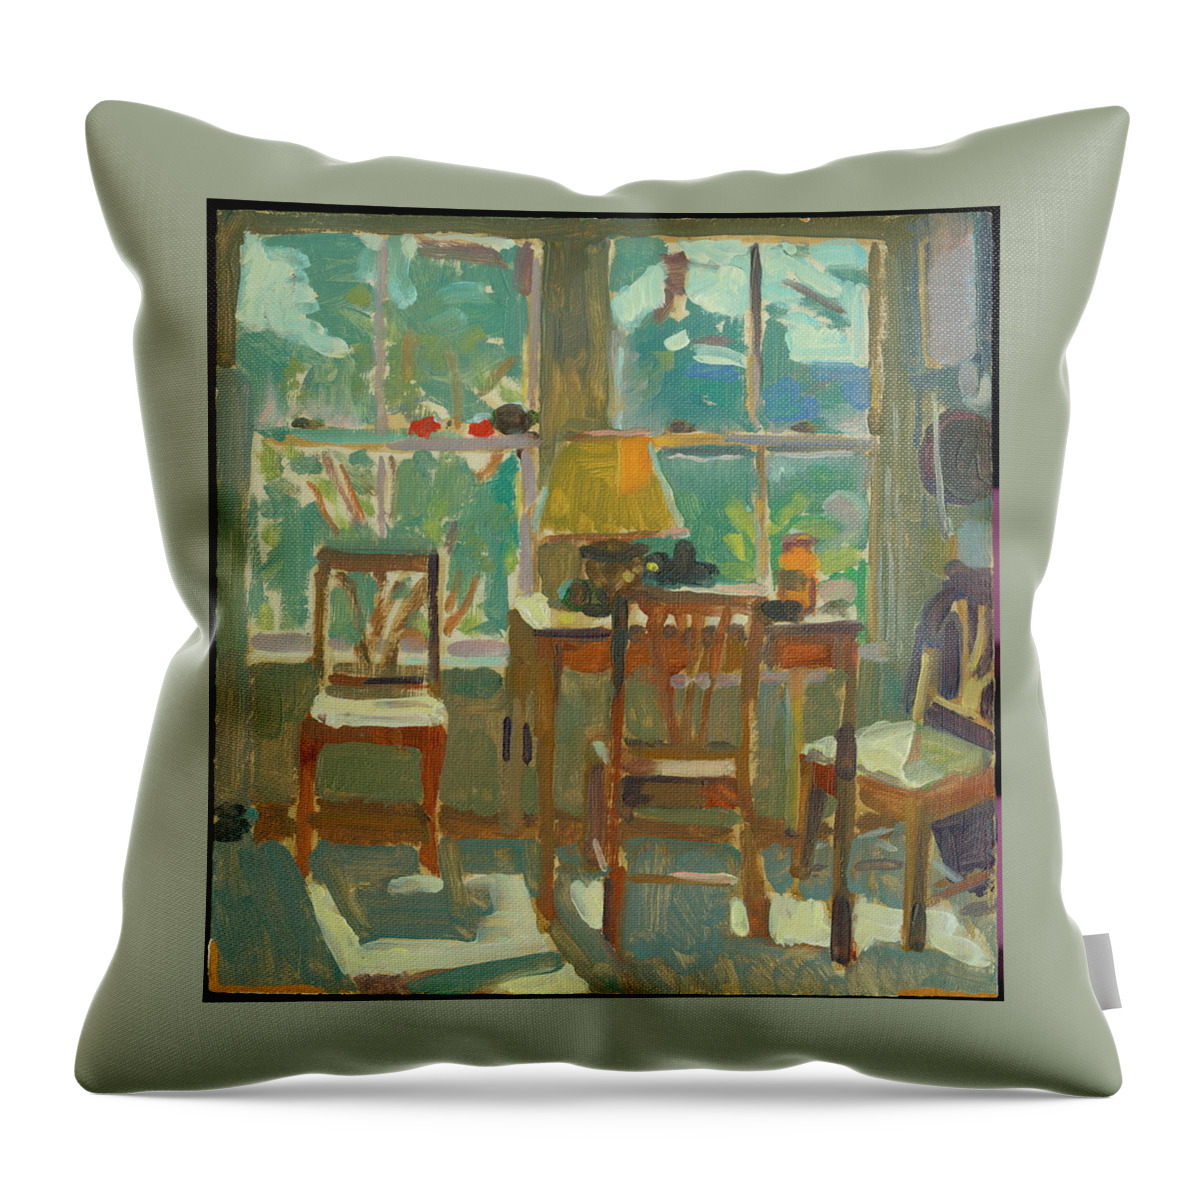  Throw Pillow featuring the painting Timeless Light by Sperry Andrews